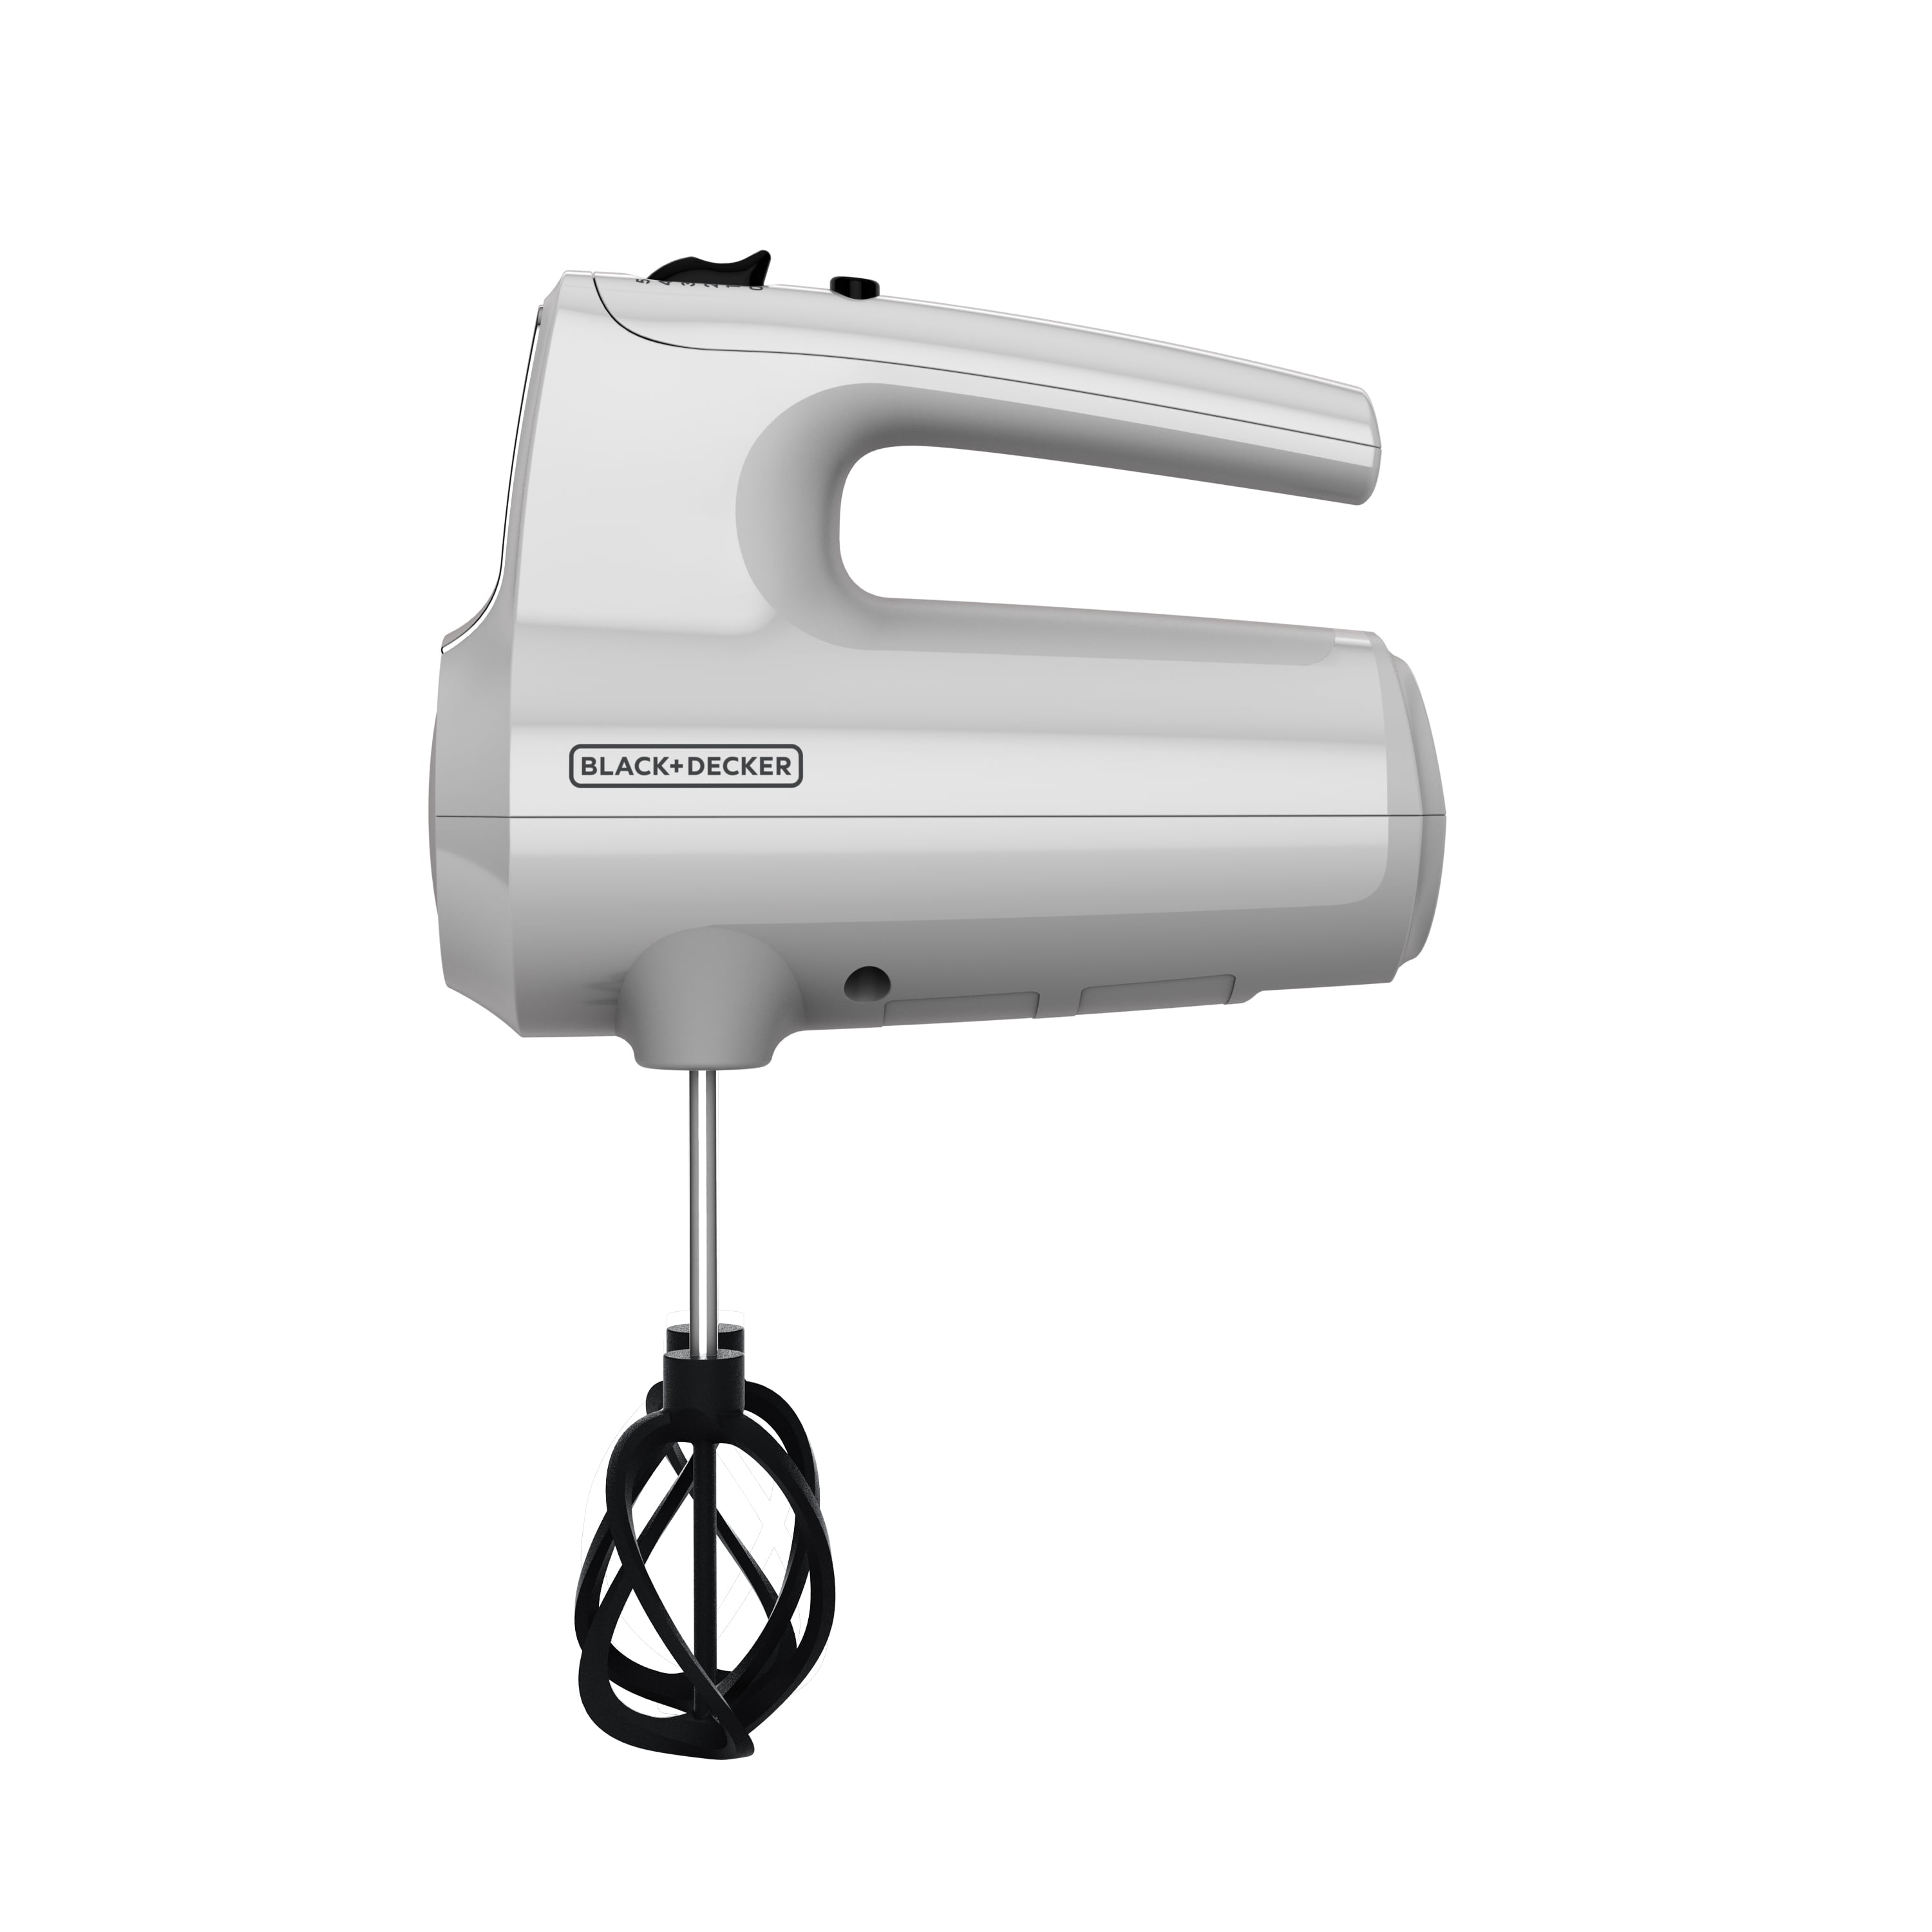 New* BLACK+DECKER MX600B Helix Performance Premium 5-Speed Hand Mixer -  general for sale - by owner - craigslist